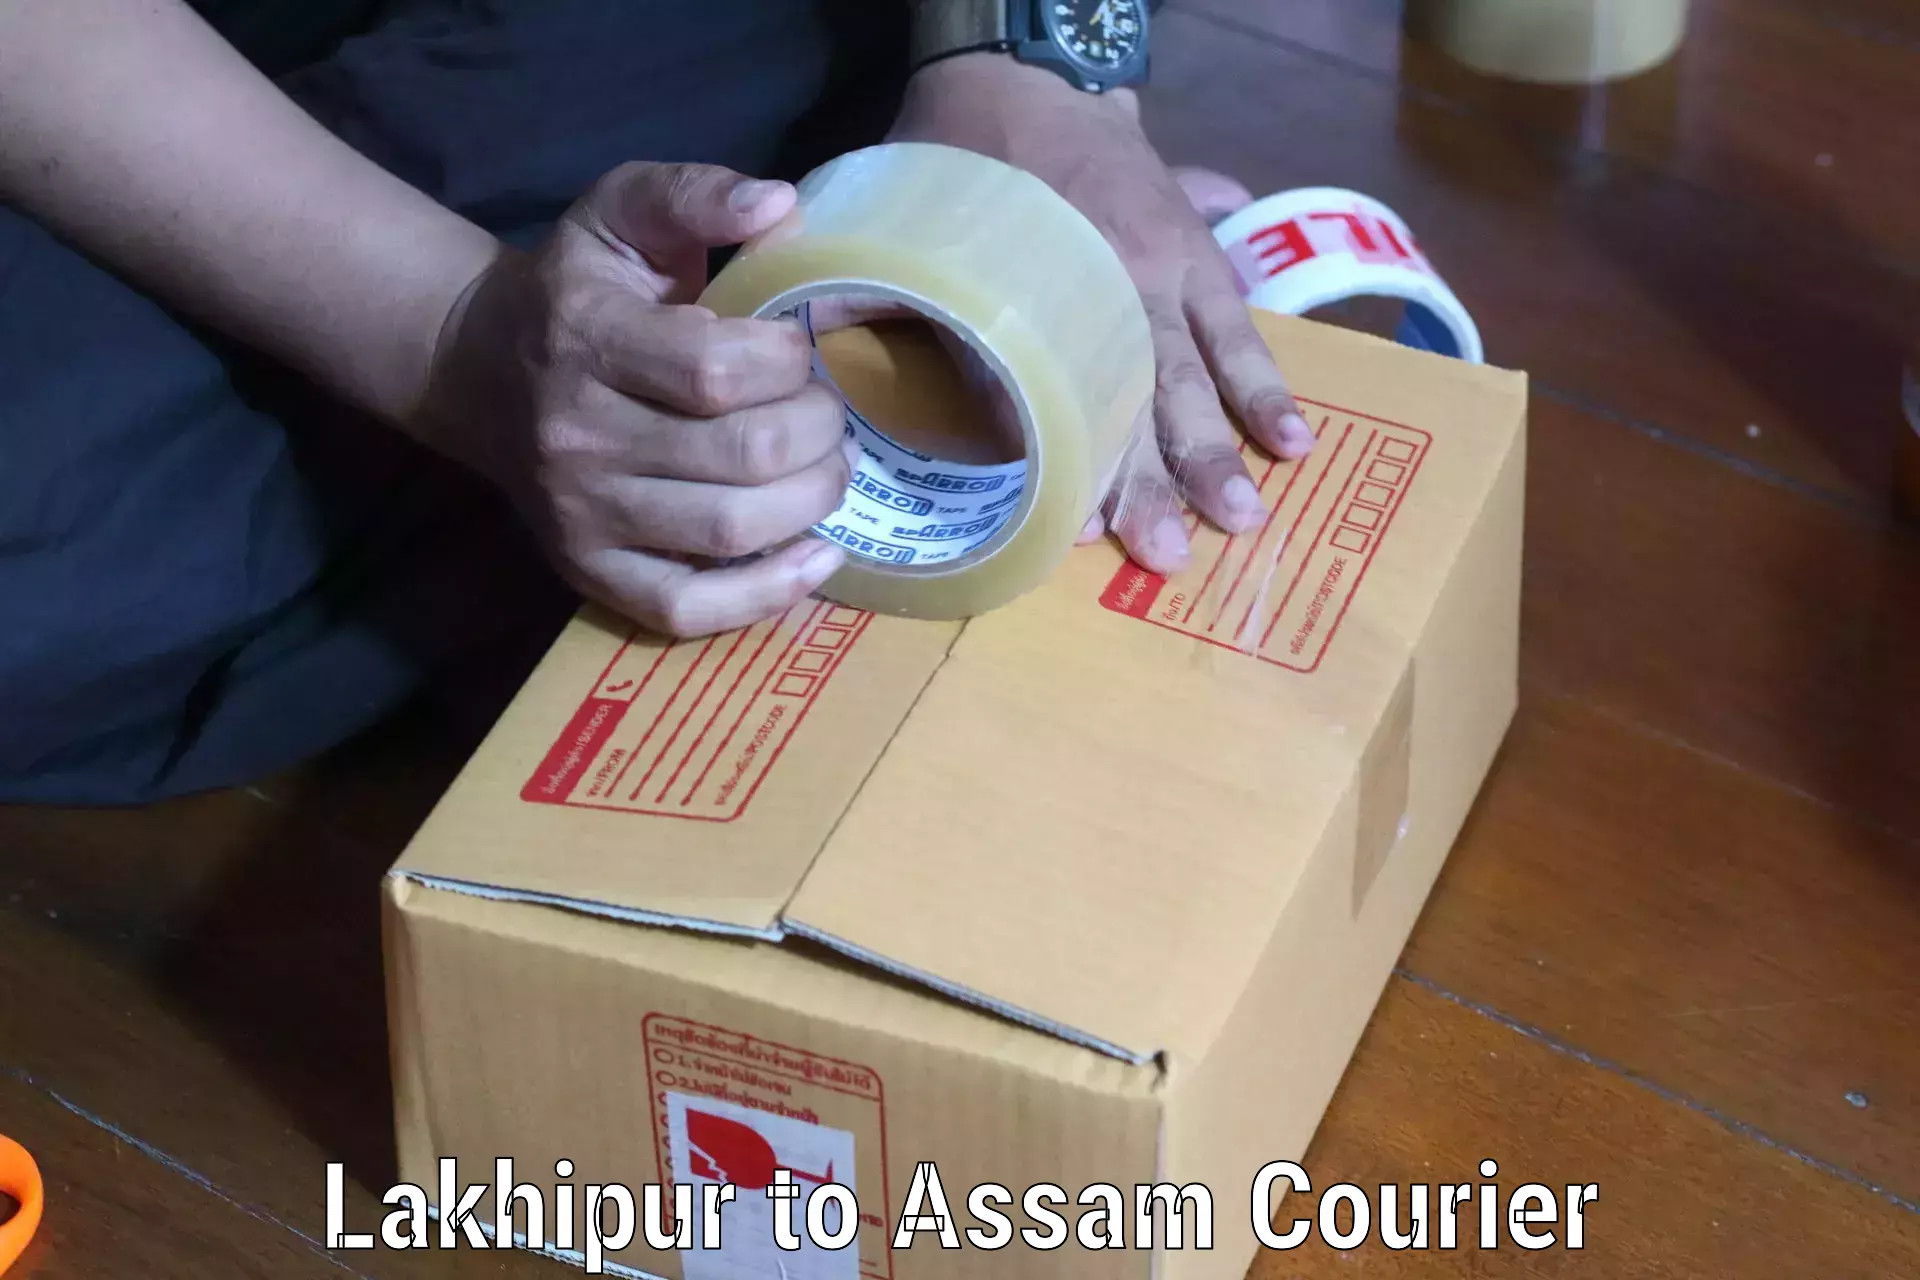 Reliable logistics providers Lakhipur to Assam